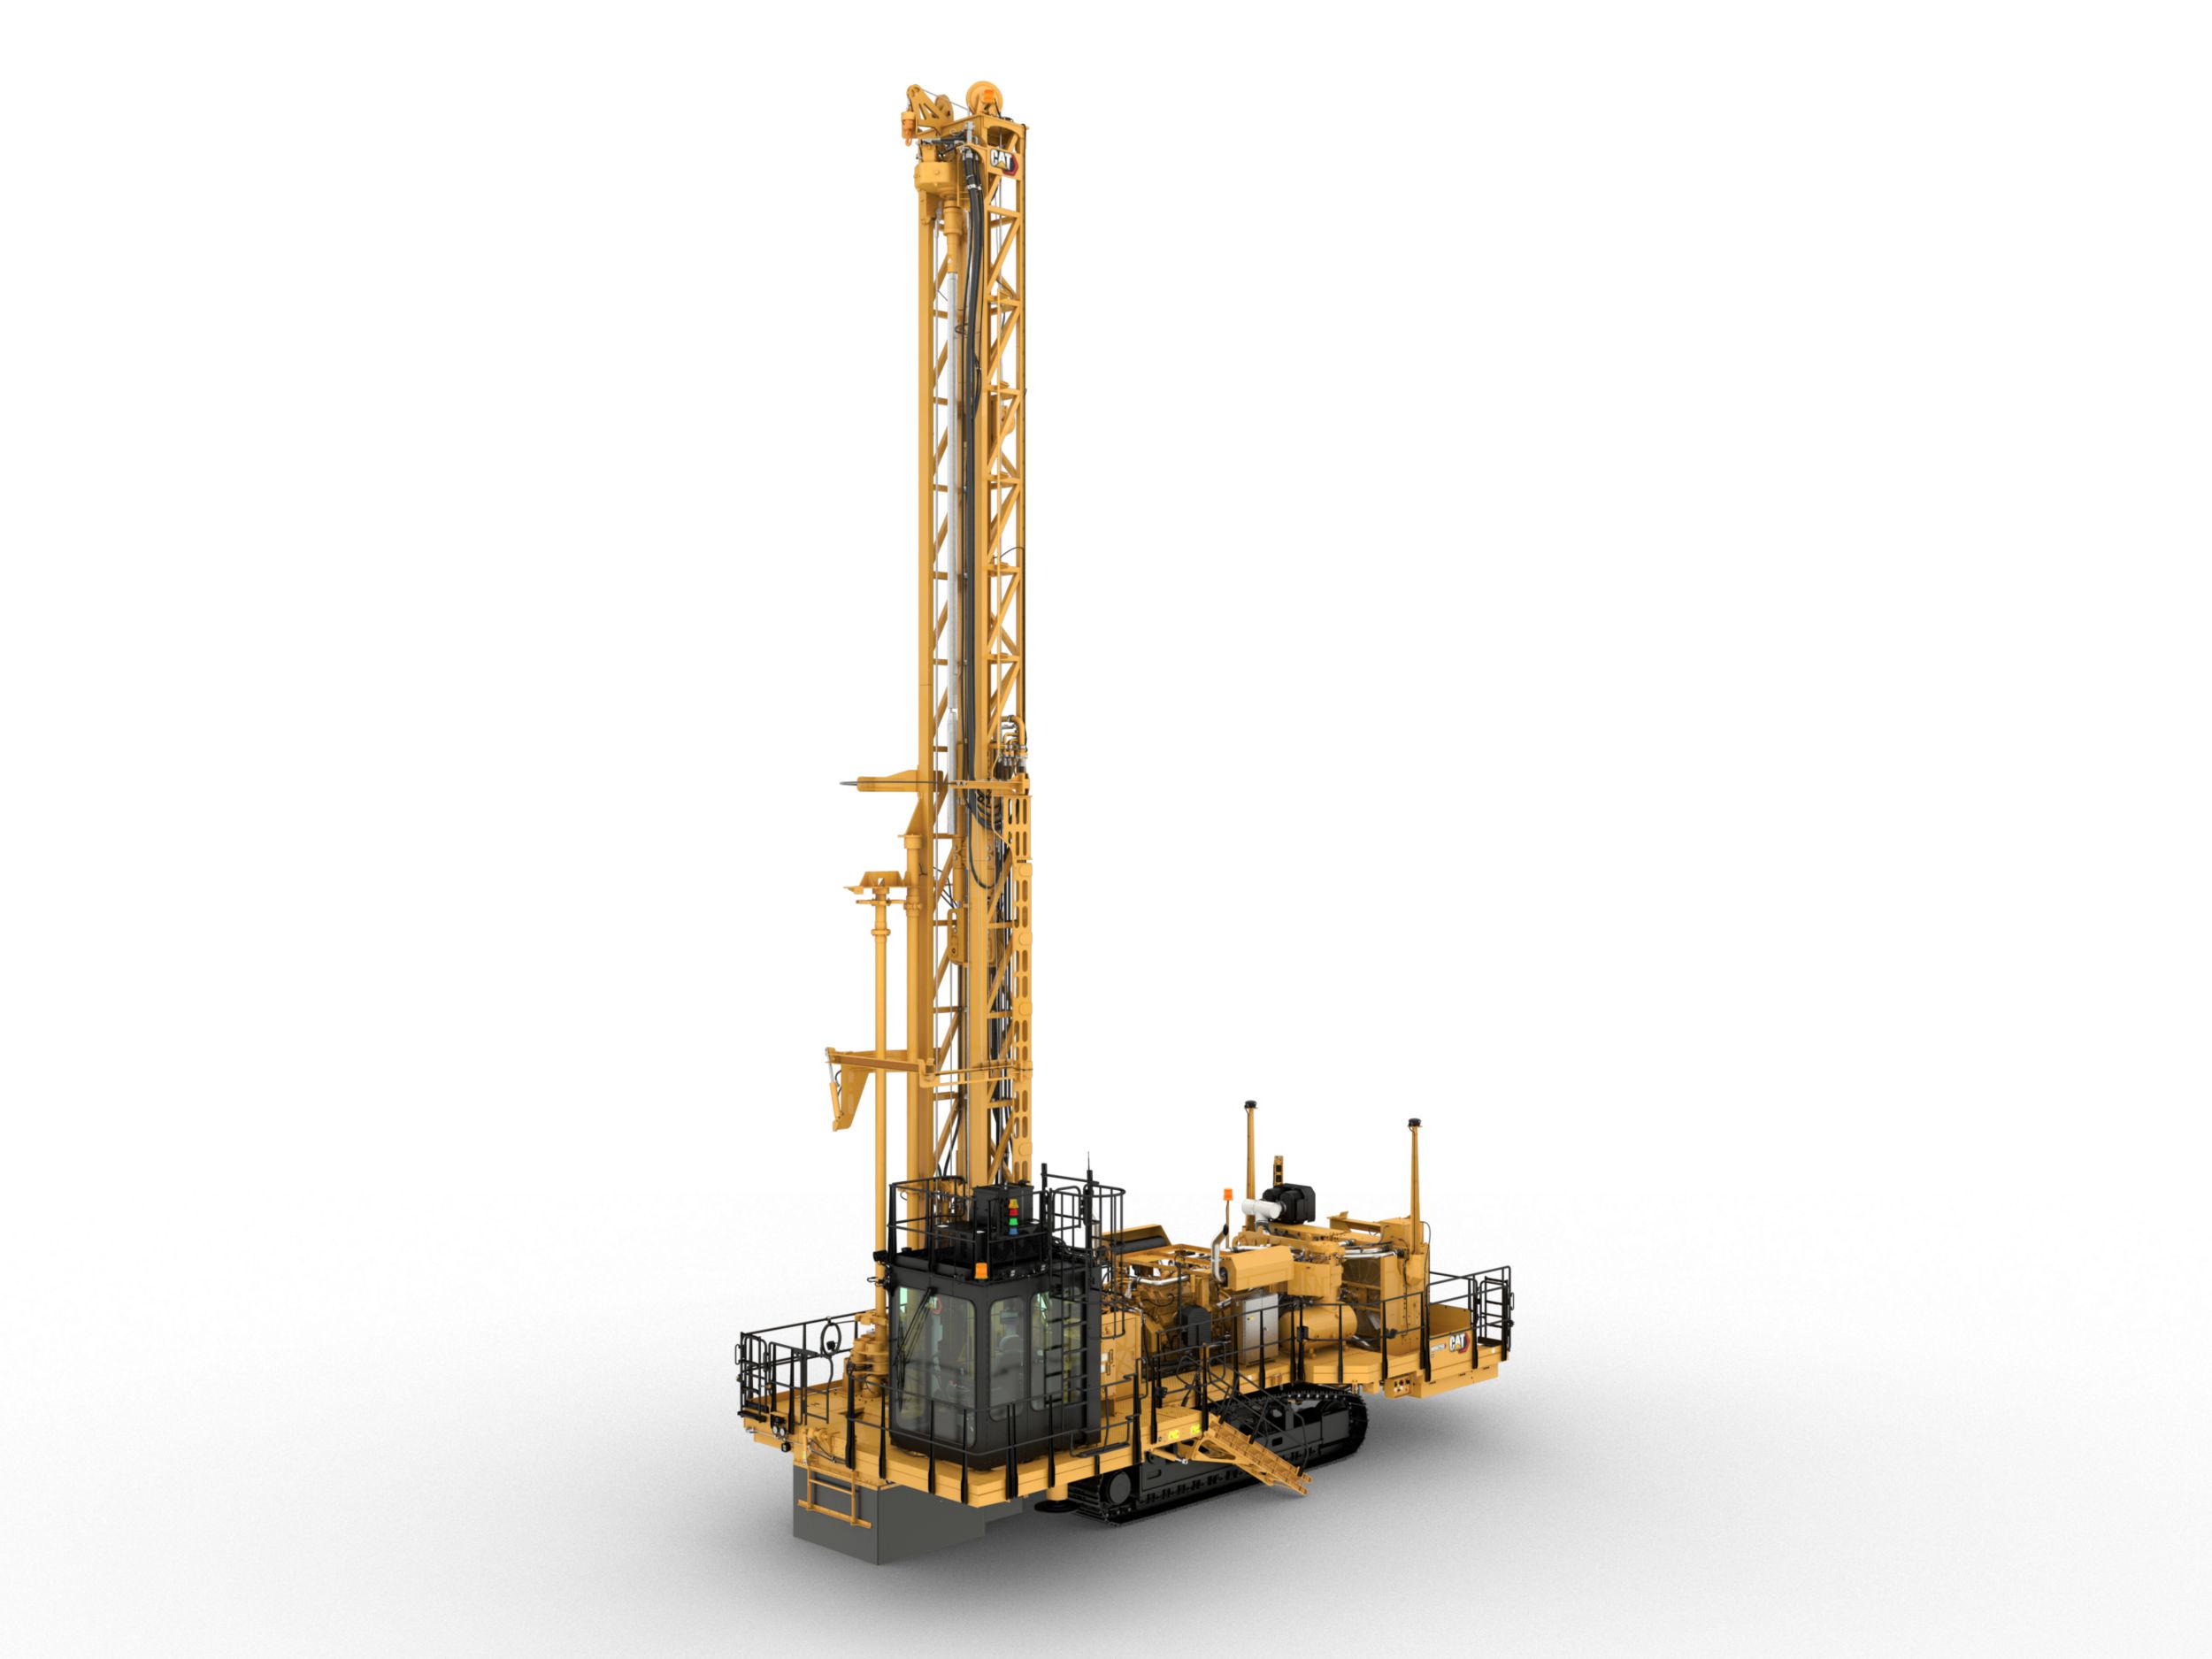 MD6250 Rotary Blasthole Drill Specifications